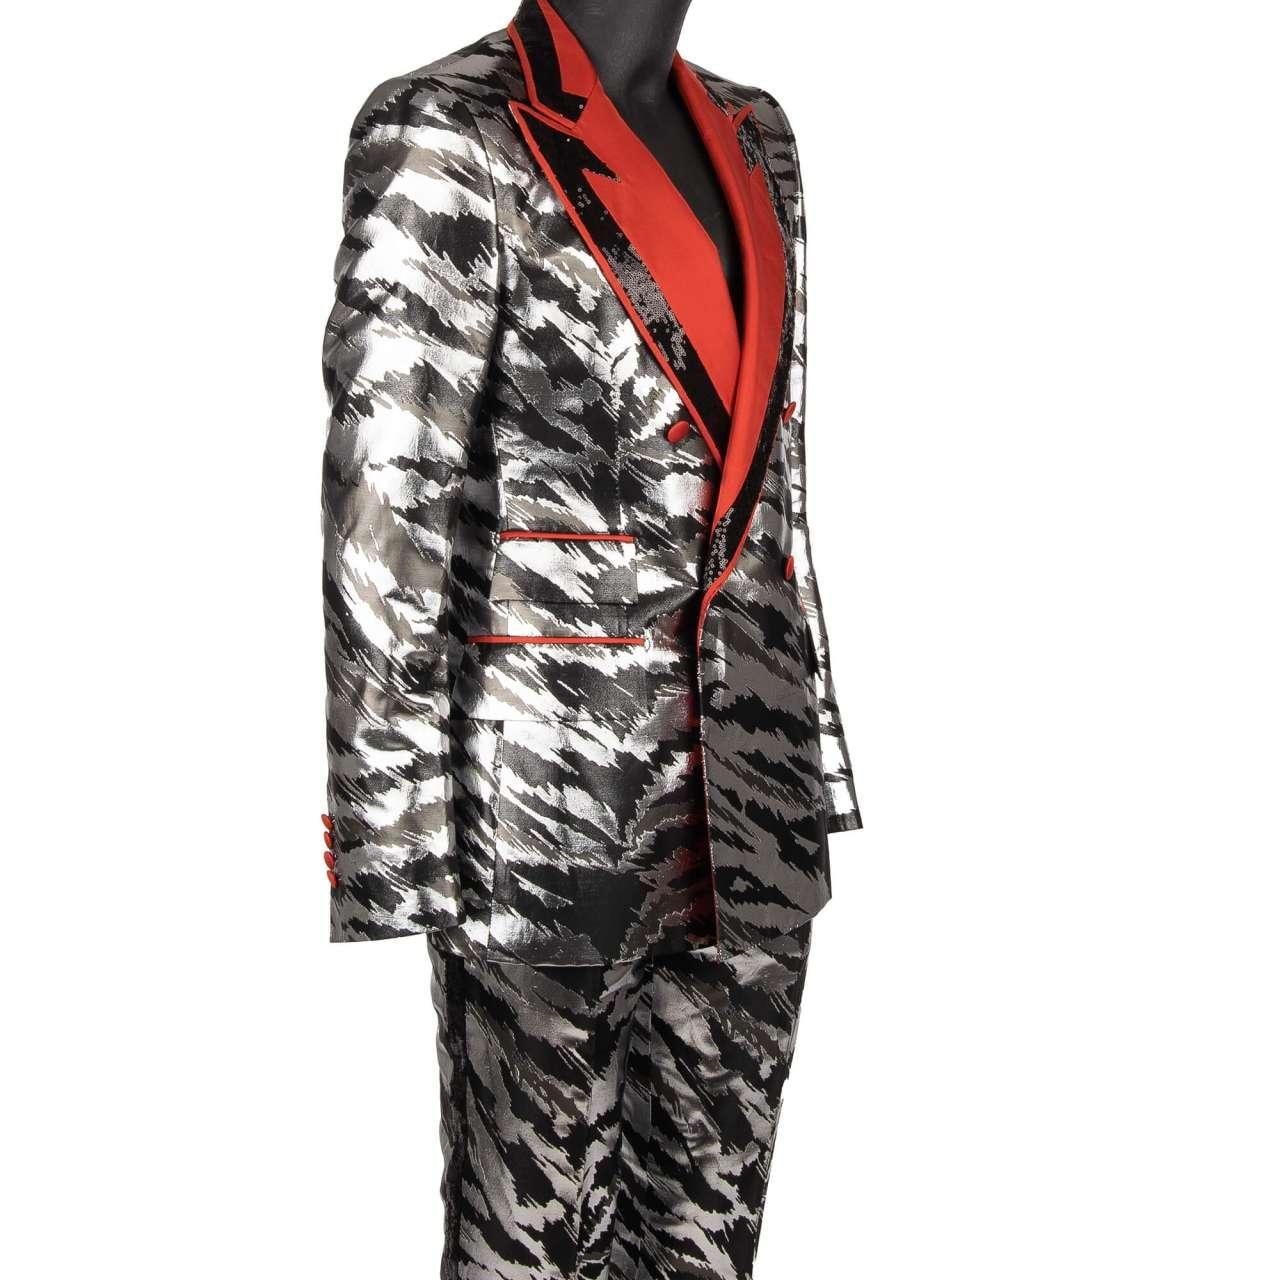 D&G Sequin Jacquard Double breasted Suit Silver Black Red 50 US 40 M L For Sale 1